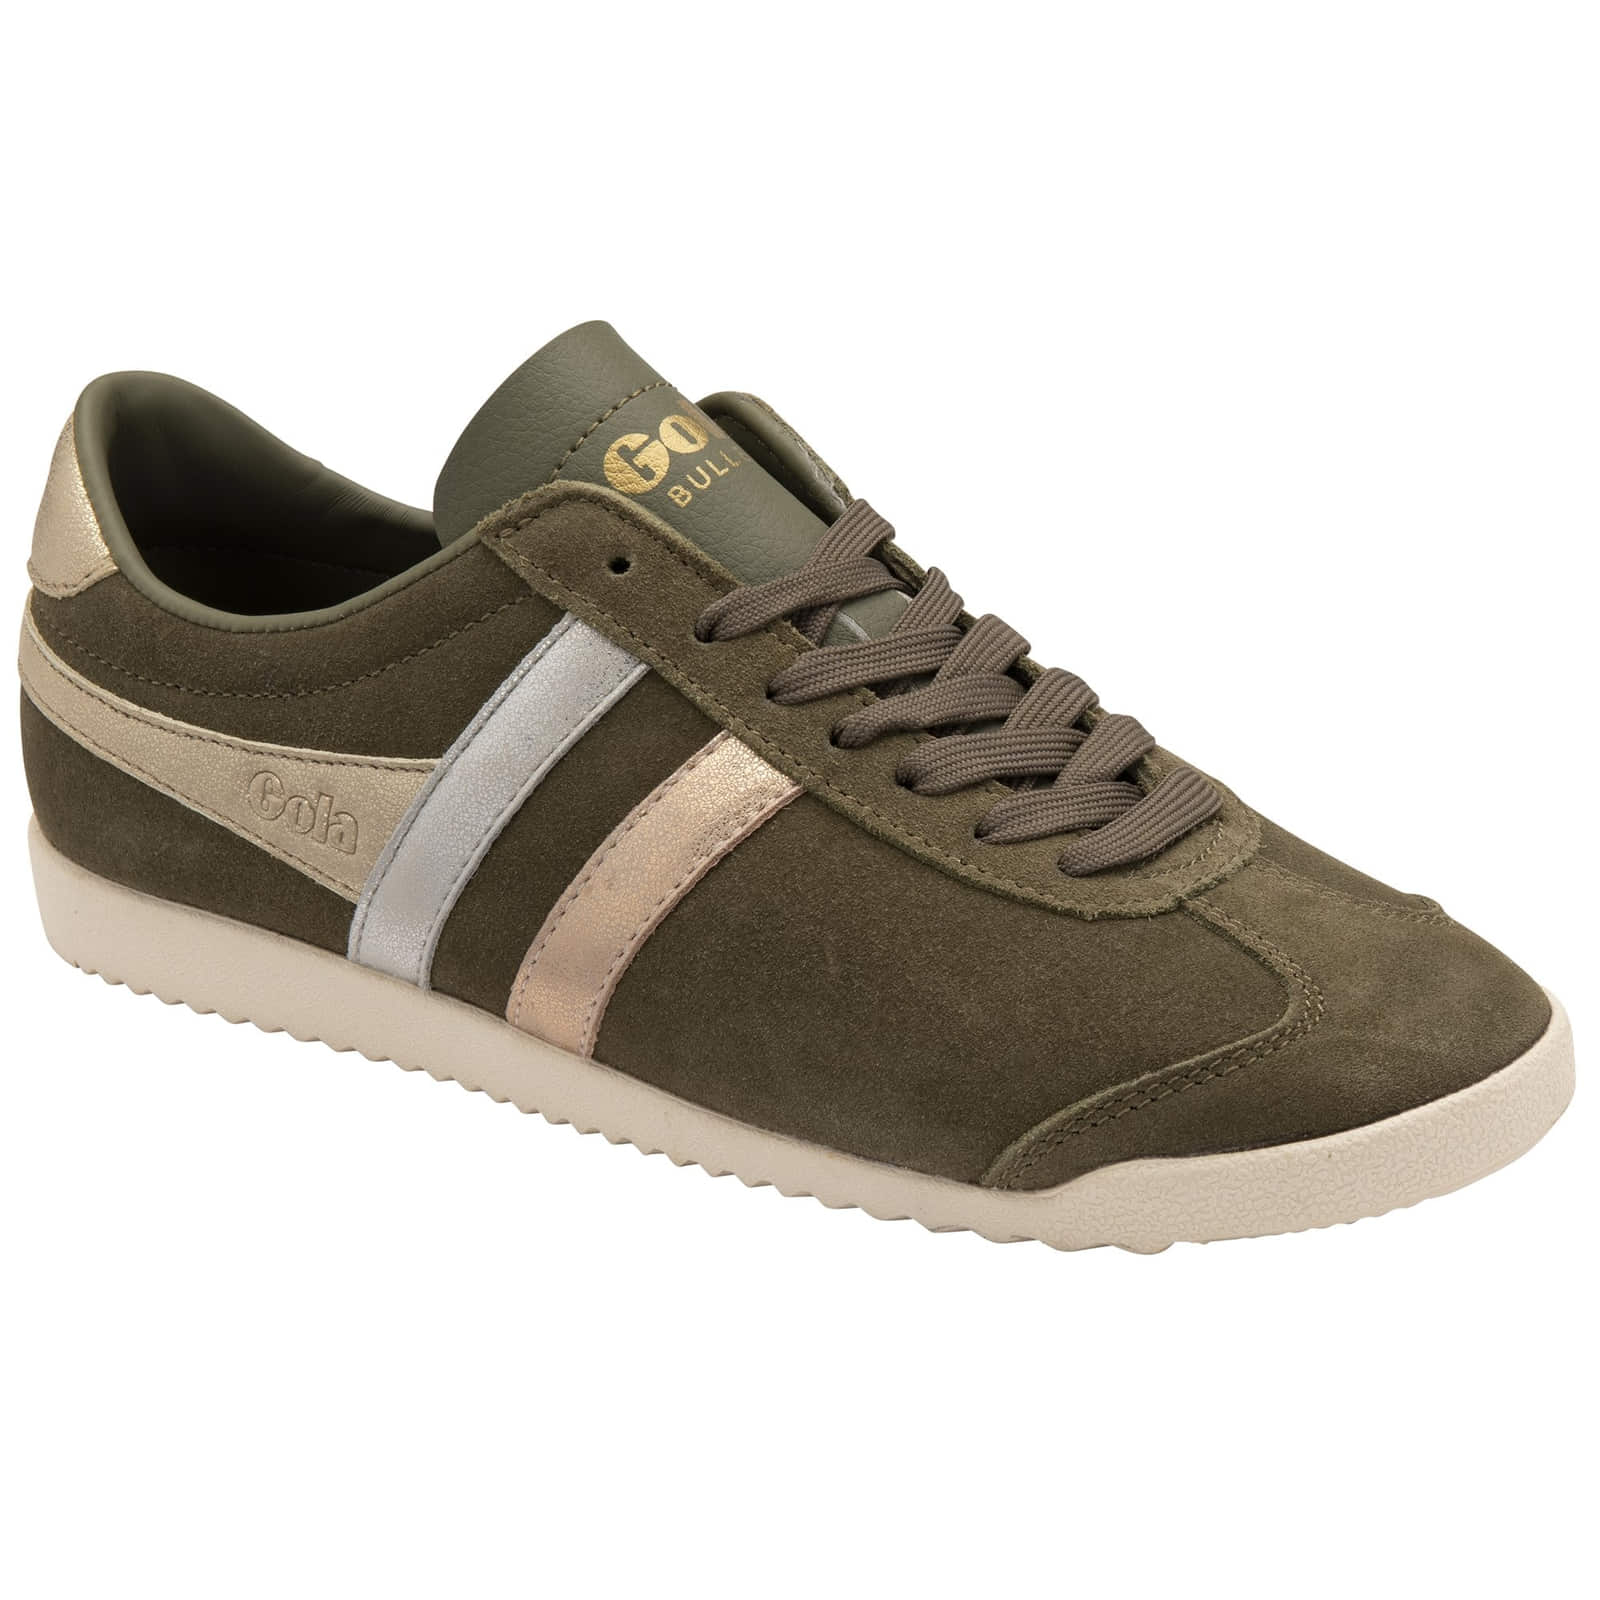 Gola Women's Bullet Mirror Trident Classic Trainers Shoes - UK 4